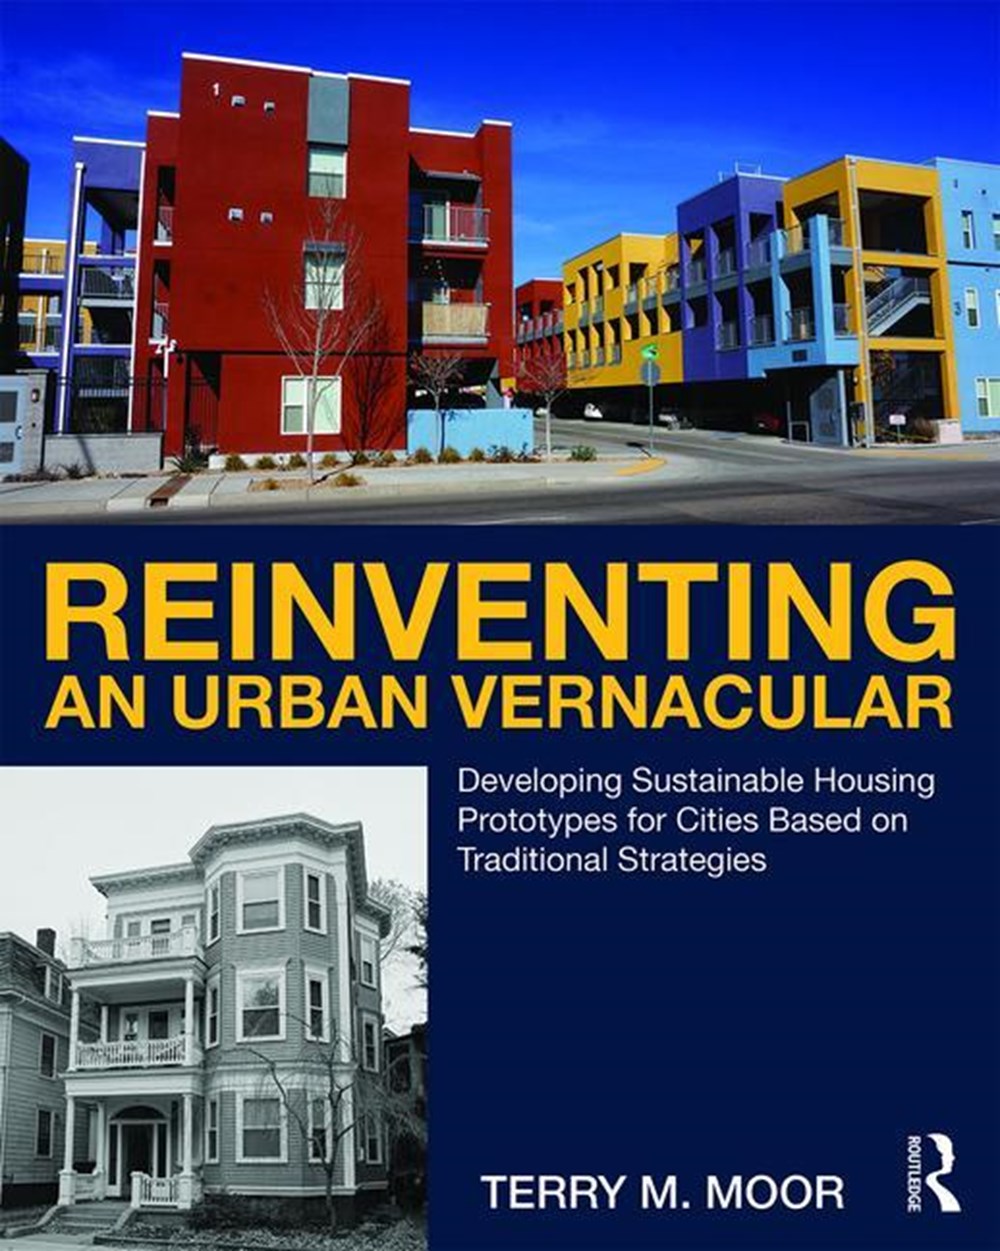 Reinventing an Urban Vernacular: Developing Sustainable Housing Prototypes for Cities Based on Tradi